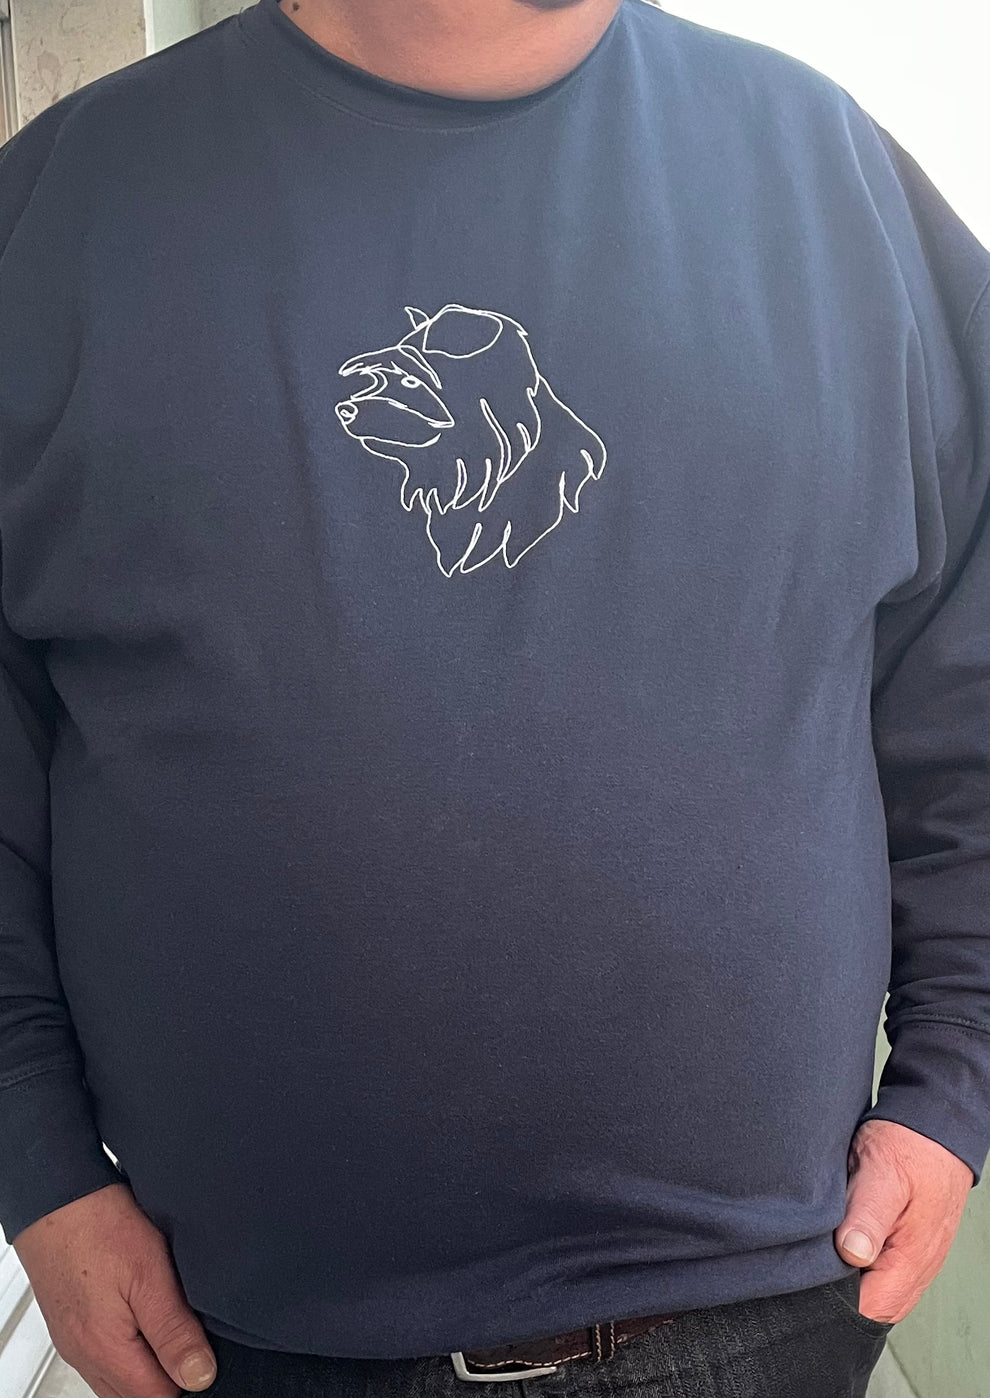 Client wearing his custom embroidered sweatshirt with line art of his dog portrait (Yorkshire Terrier).